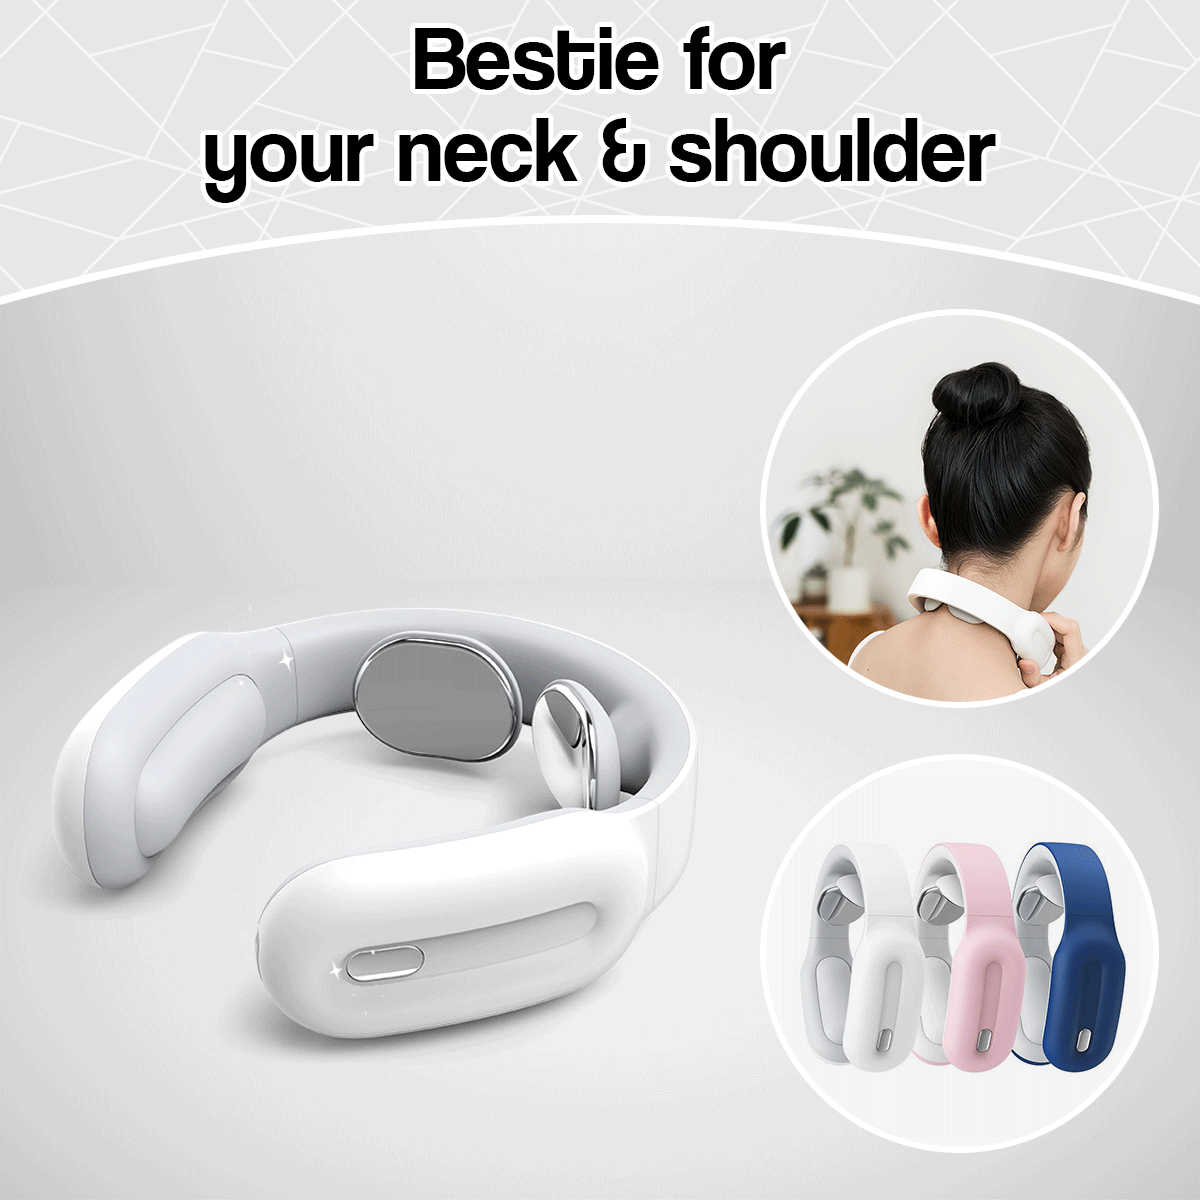 Smart Neck Massager 🔥 CHRISTMAS SALE 50% OFF LIMITED TIME ONLY 🔥